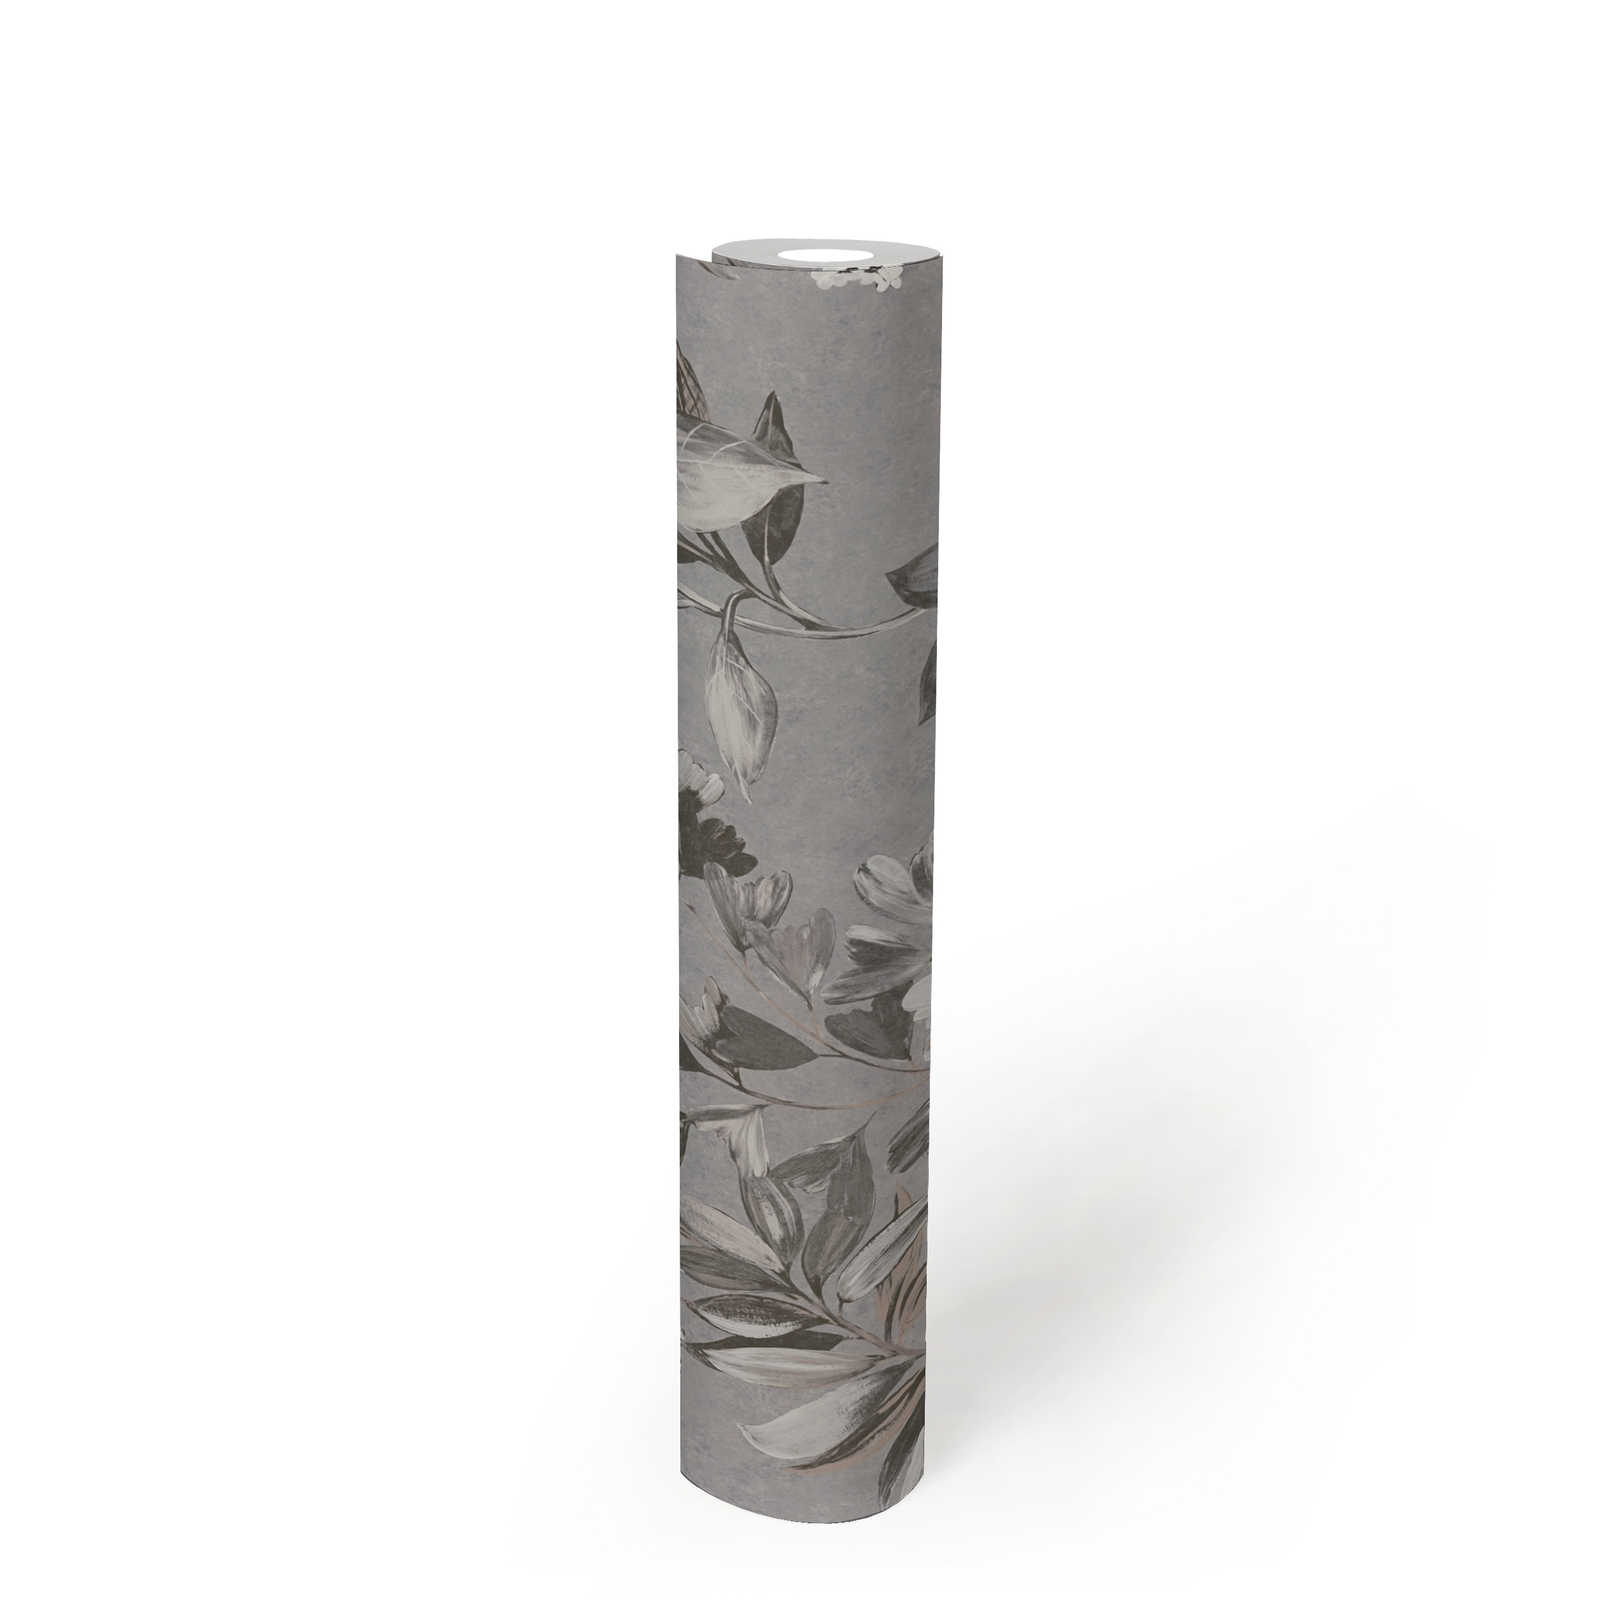             Non-woven wallpaper with floral pattern - grey, white, black
        